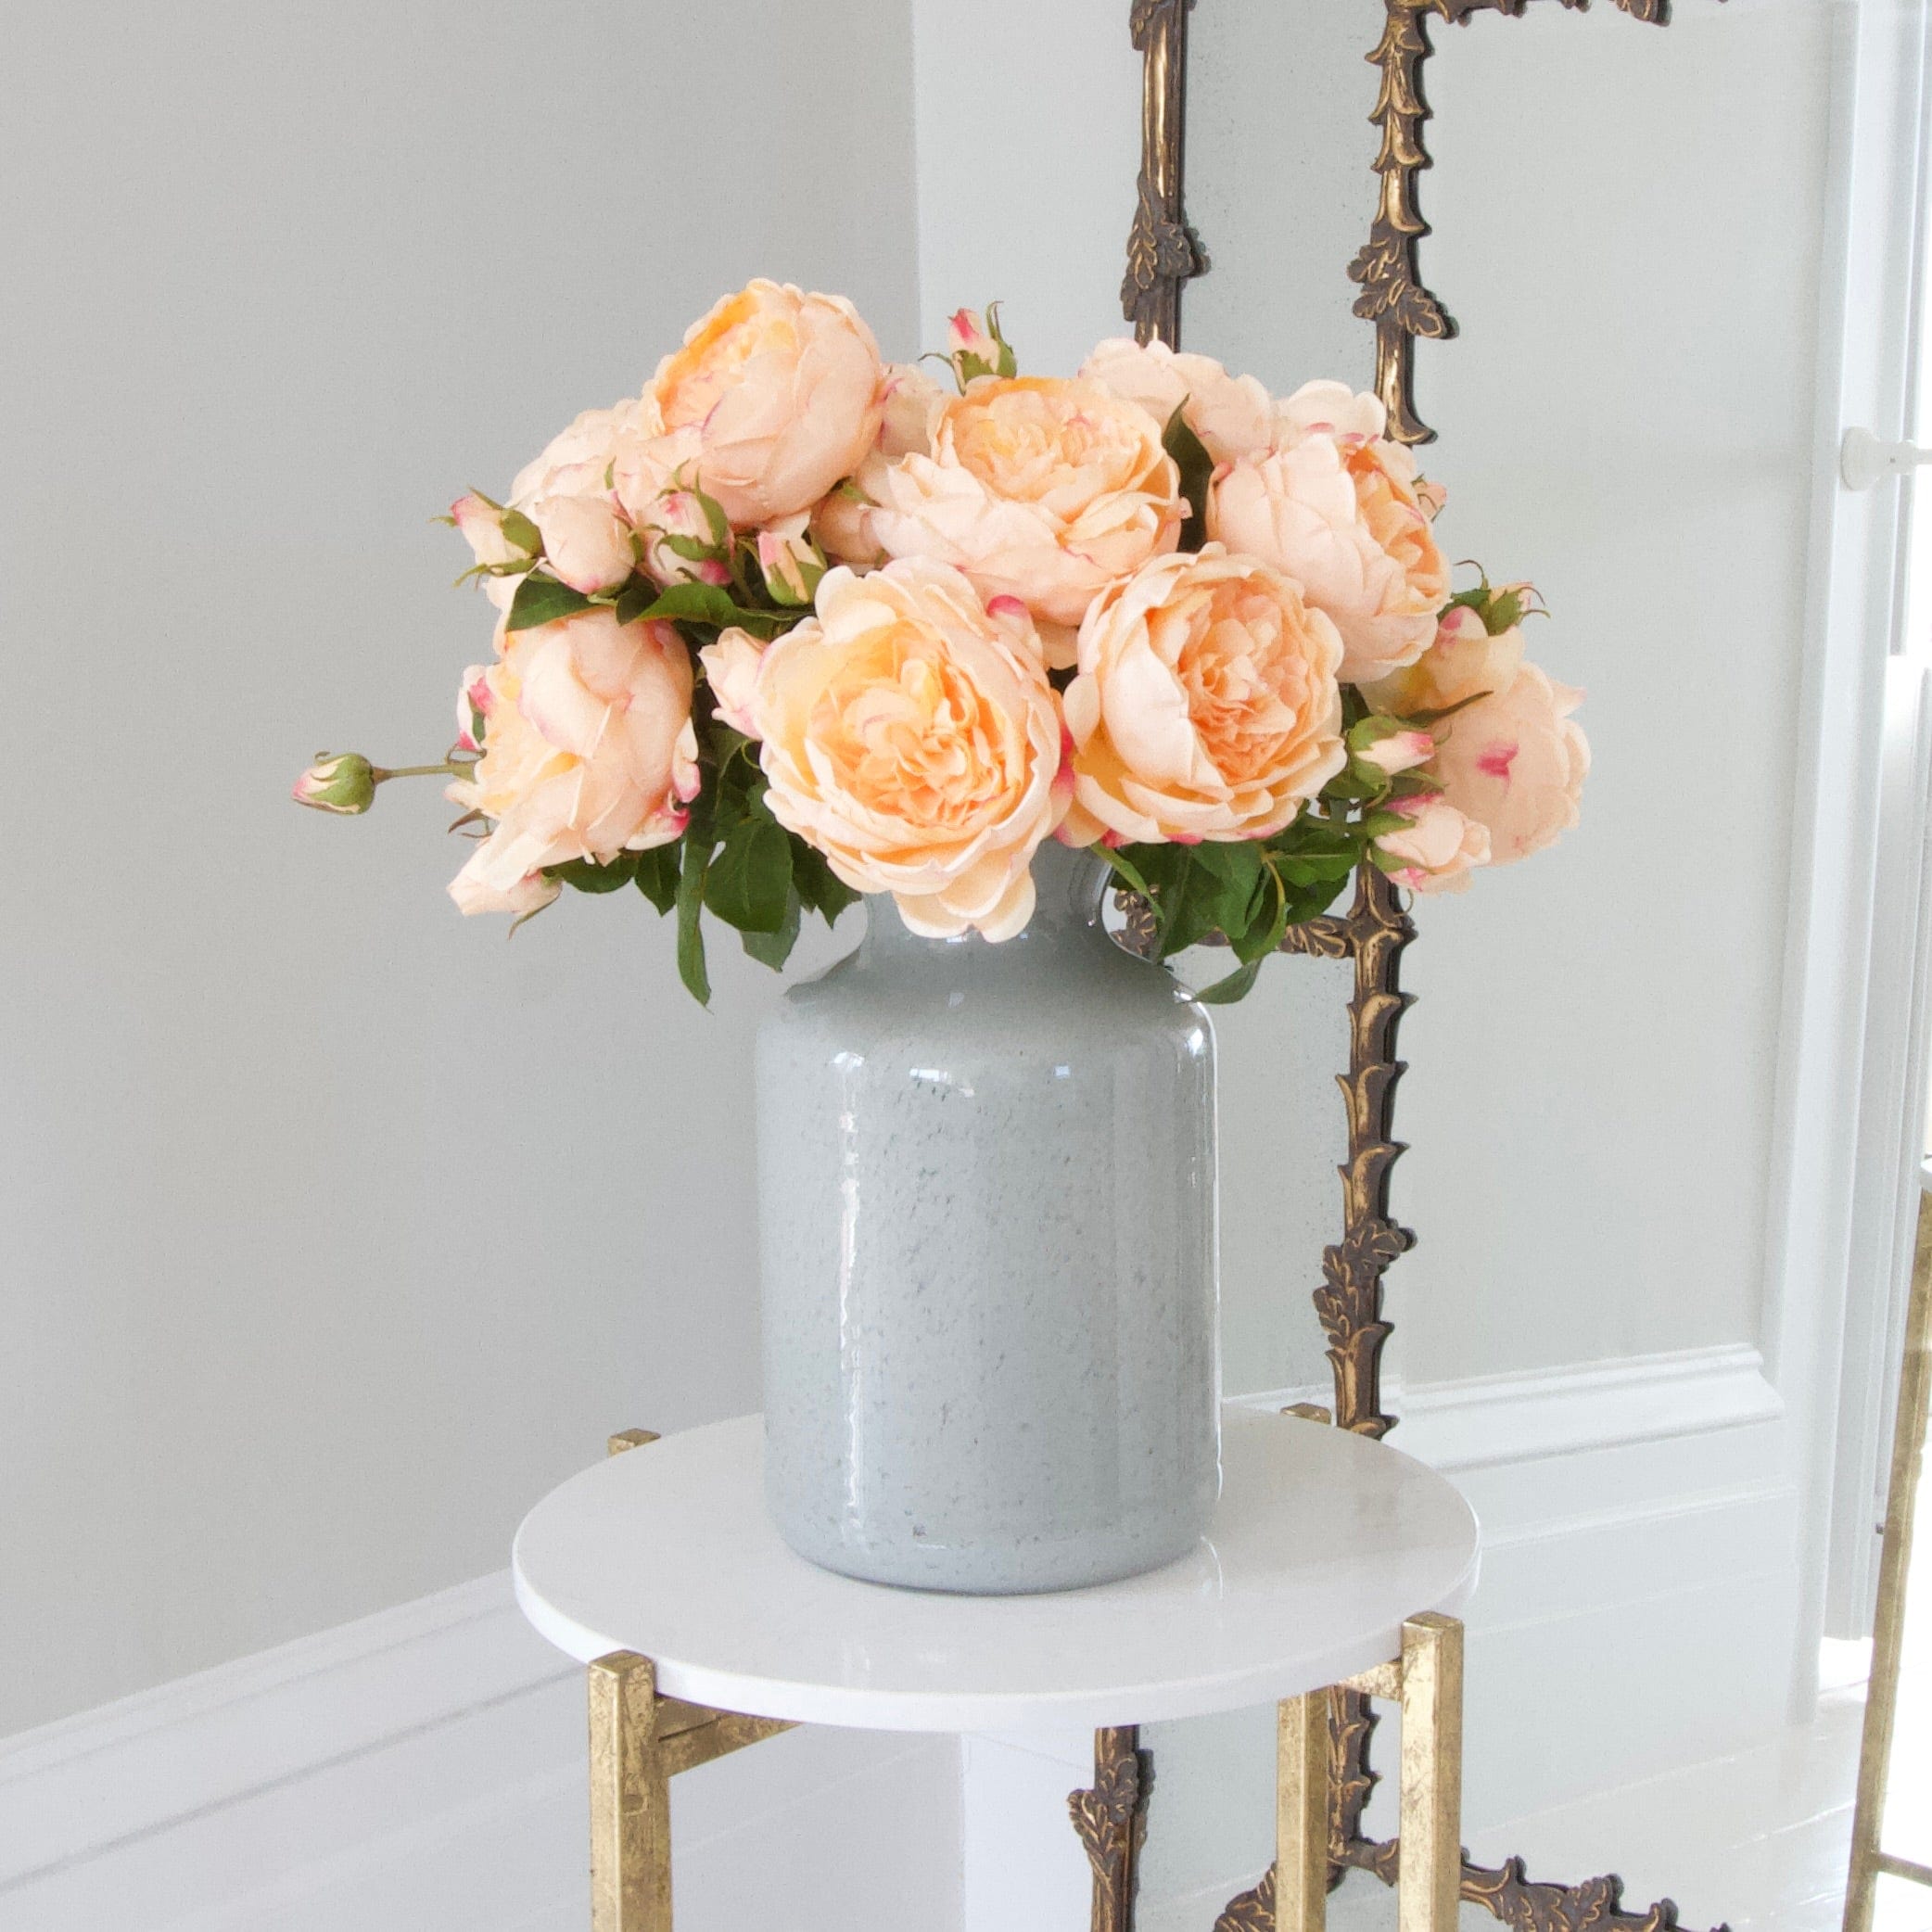 Luxury Lifelike Realistic Artificial Fabric Silk Blooms with Foliage Buy Online from The Faux Flower Company | 12 stems Peach English Rose ABY5013PC styled in Grey Glass Funnel Neck Vase ABV0144